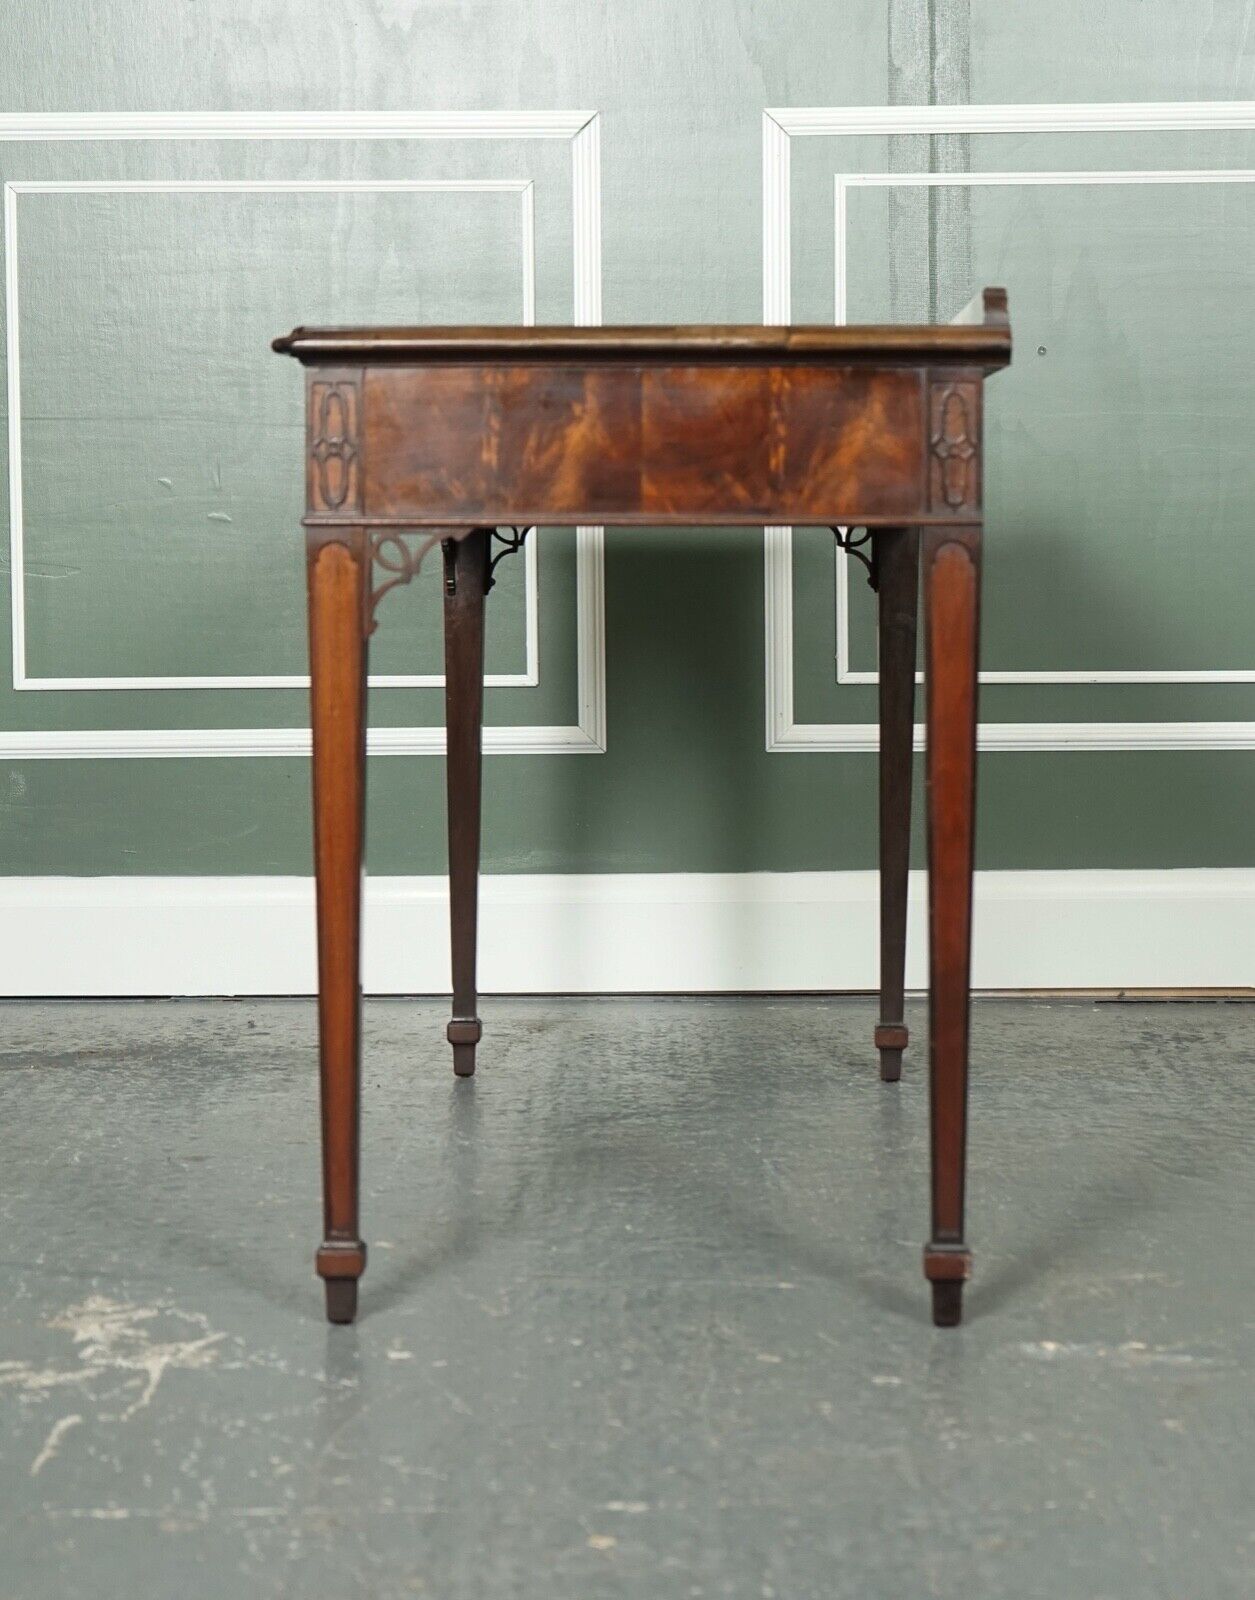 STUNNING CHIPPENDALE STYLE MAHOGANY CONSOLE HALLWAY TABLE WITH ORIGINAL HANDLES